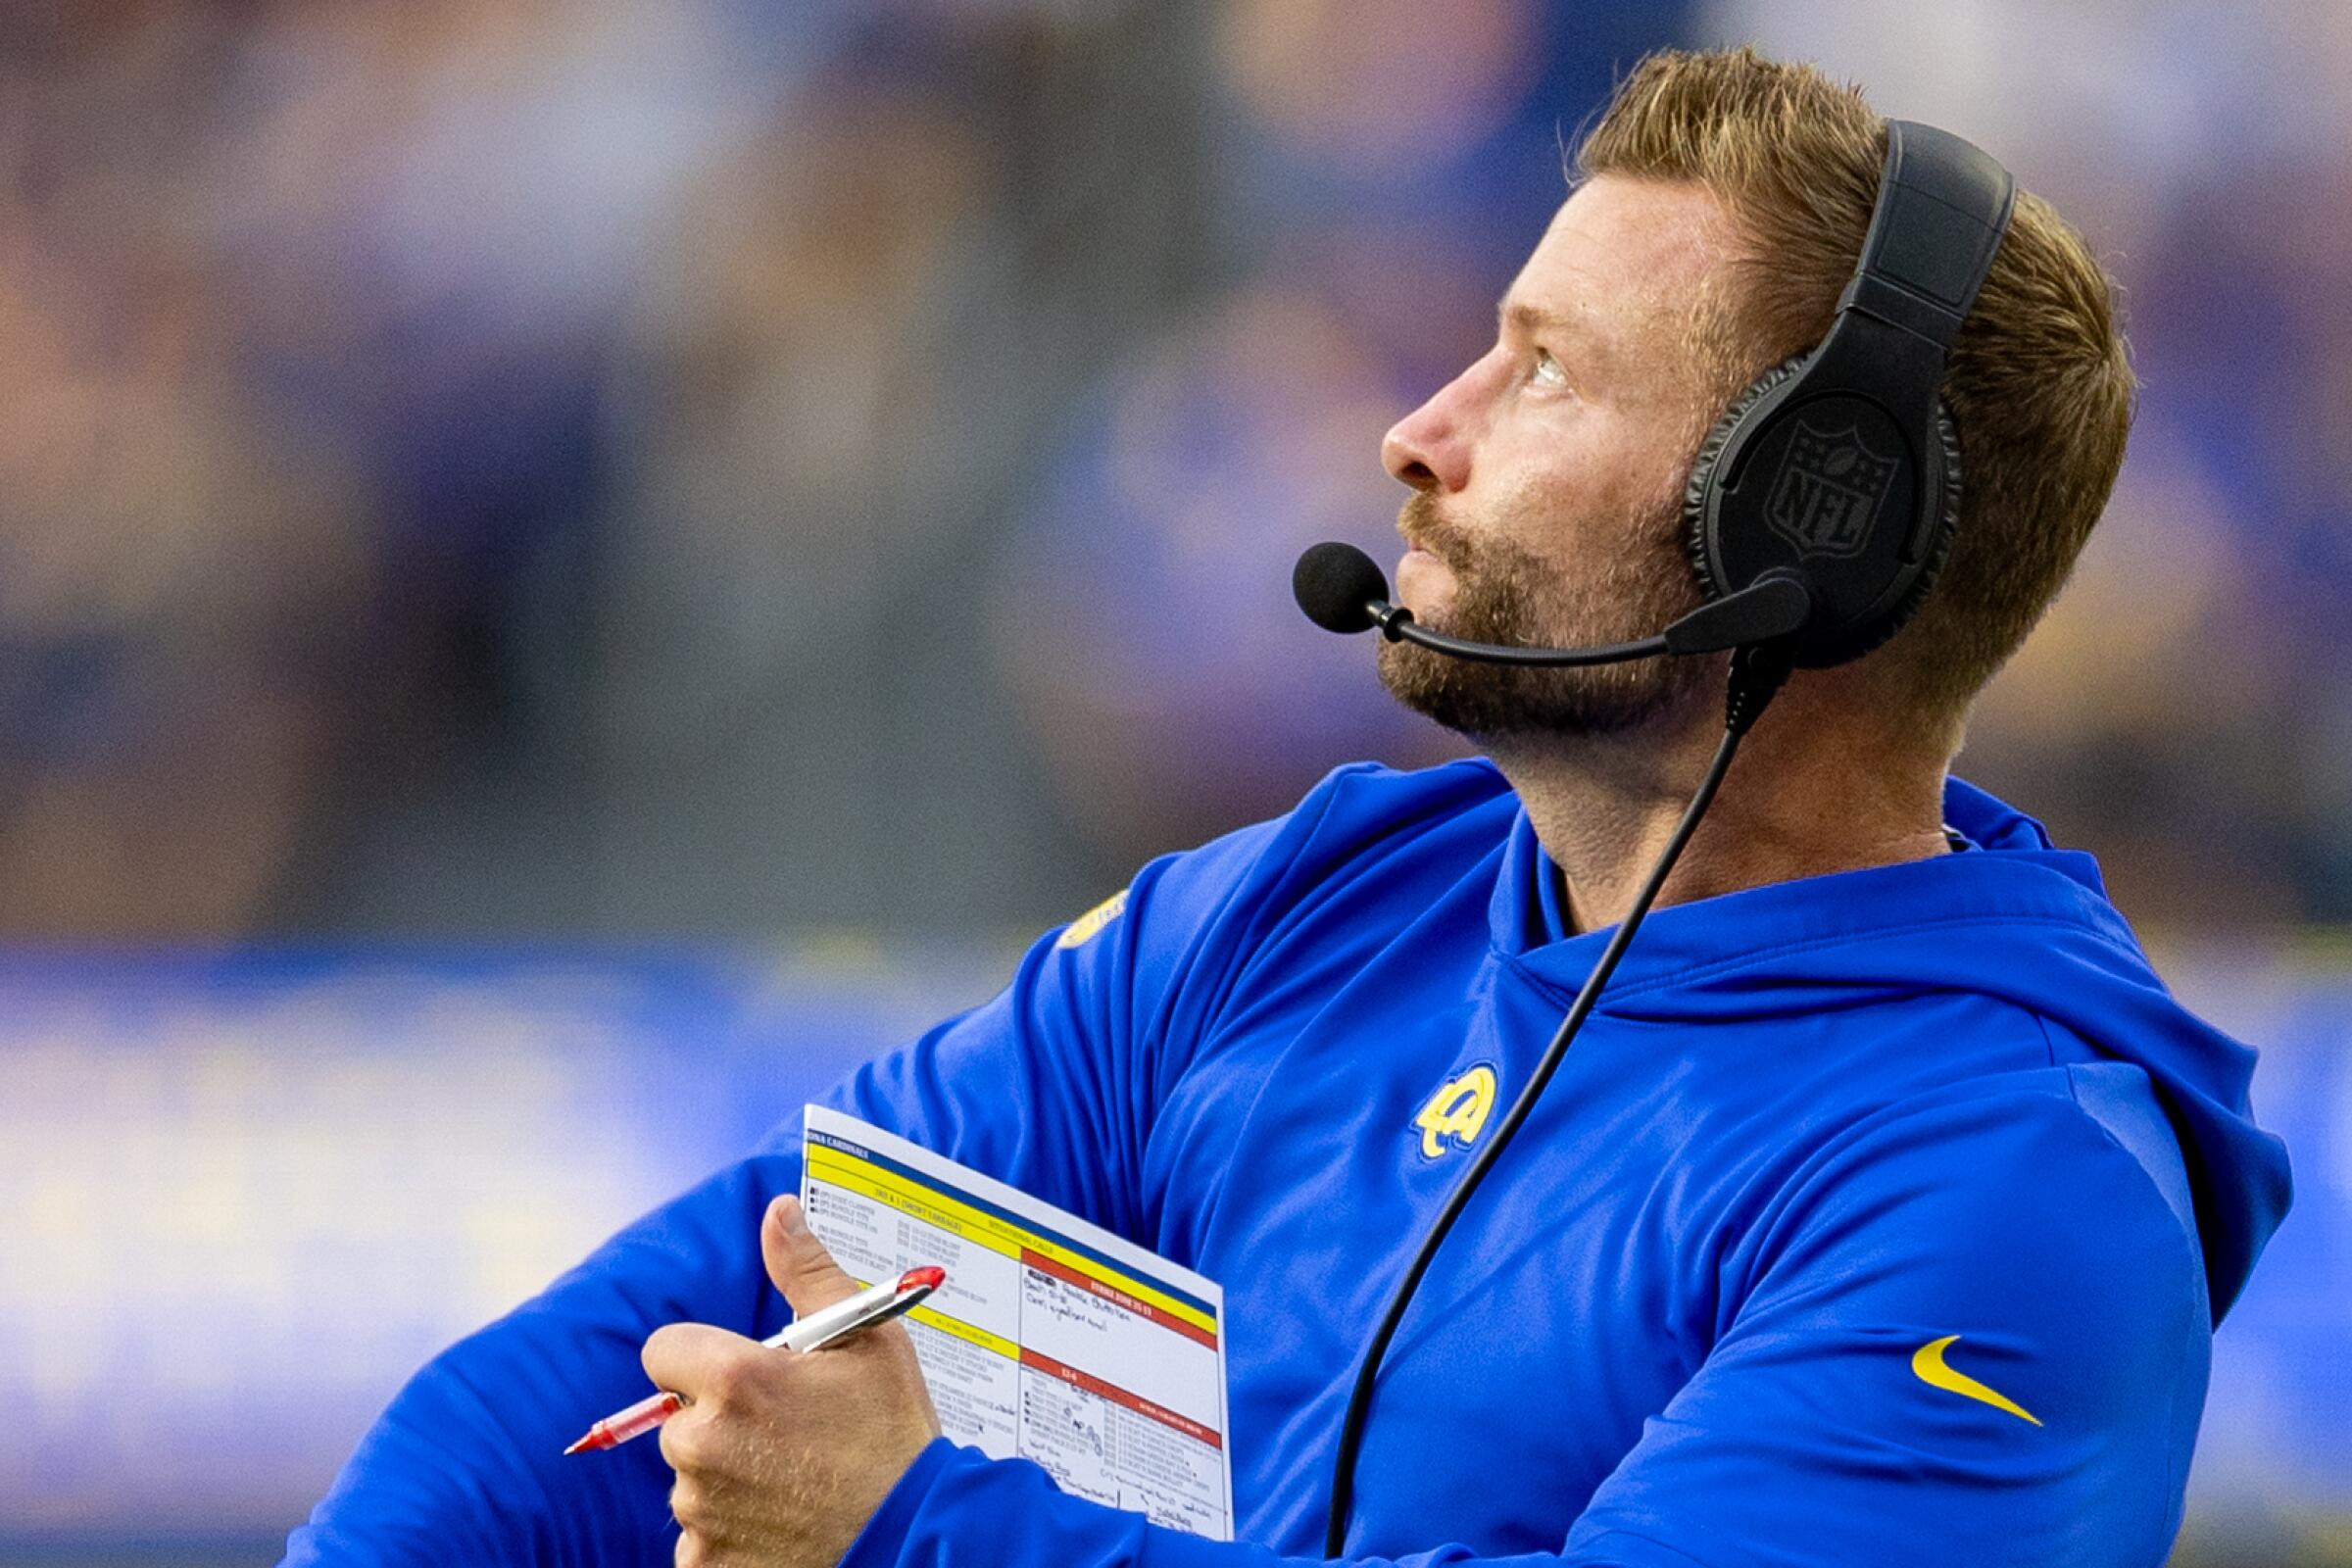 Rams coach Sean McVay celebrates a touchdown that had been under official review.